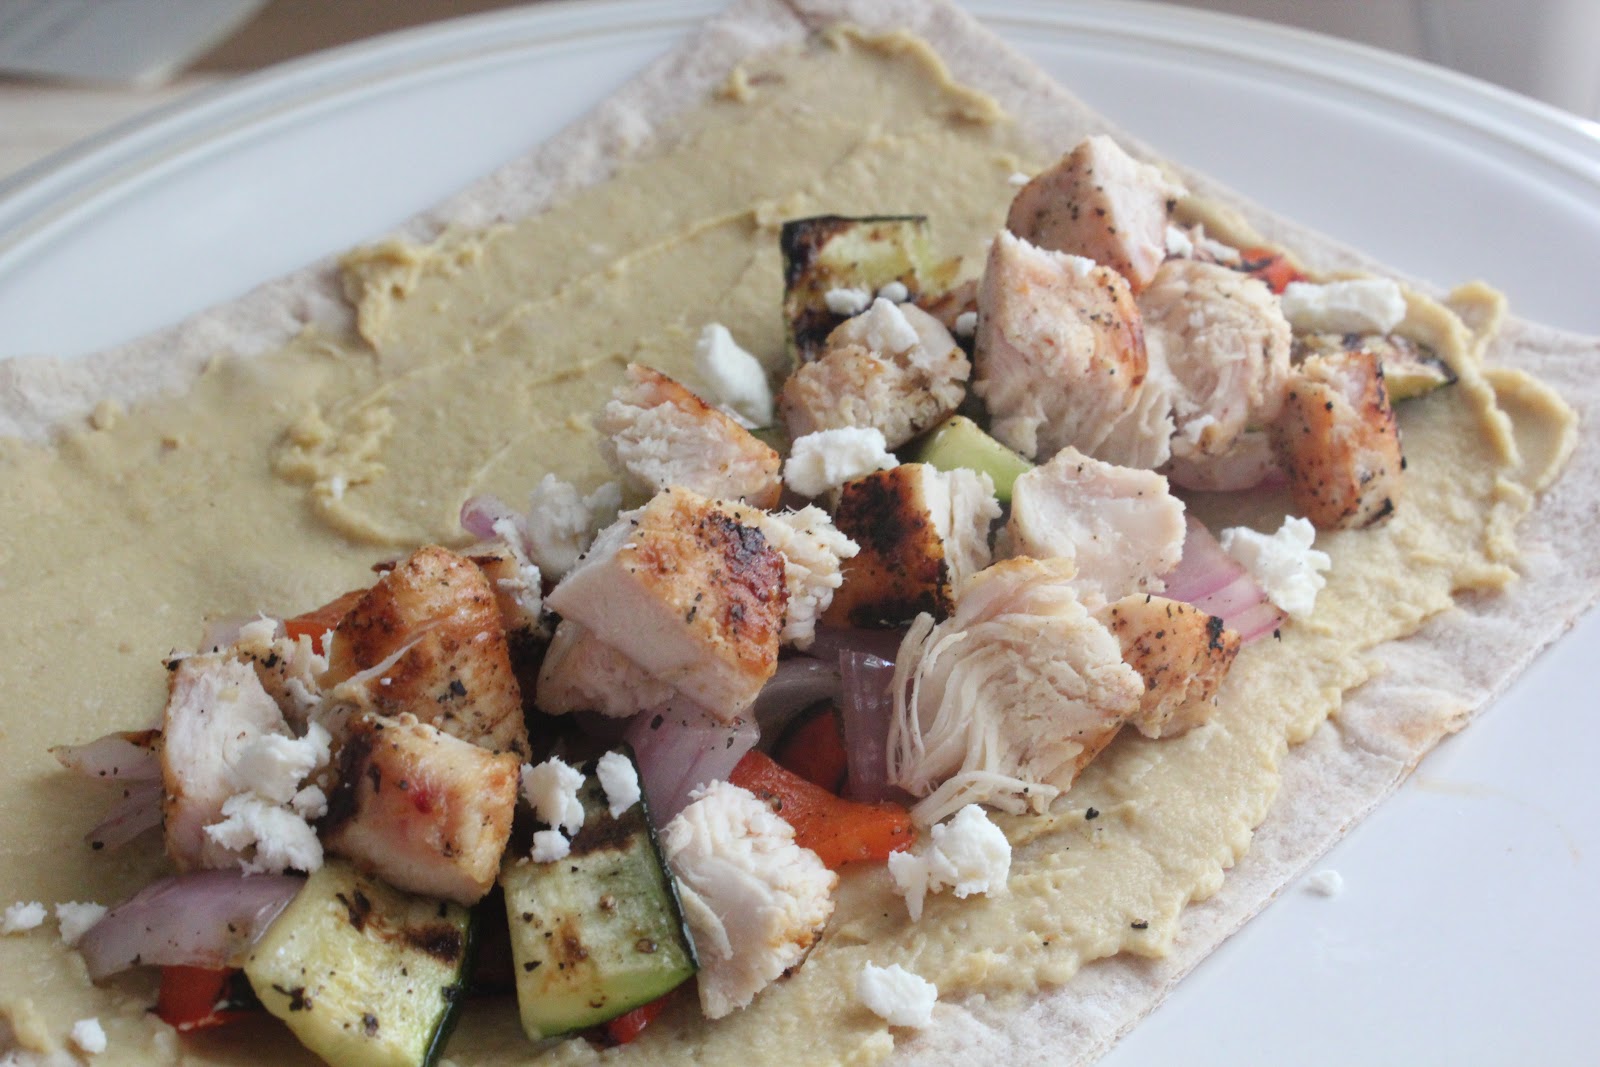 Near to Nothing: Grilled Chicken and Vegetable Wraps